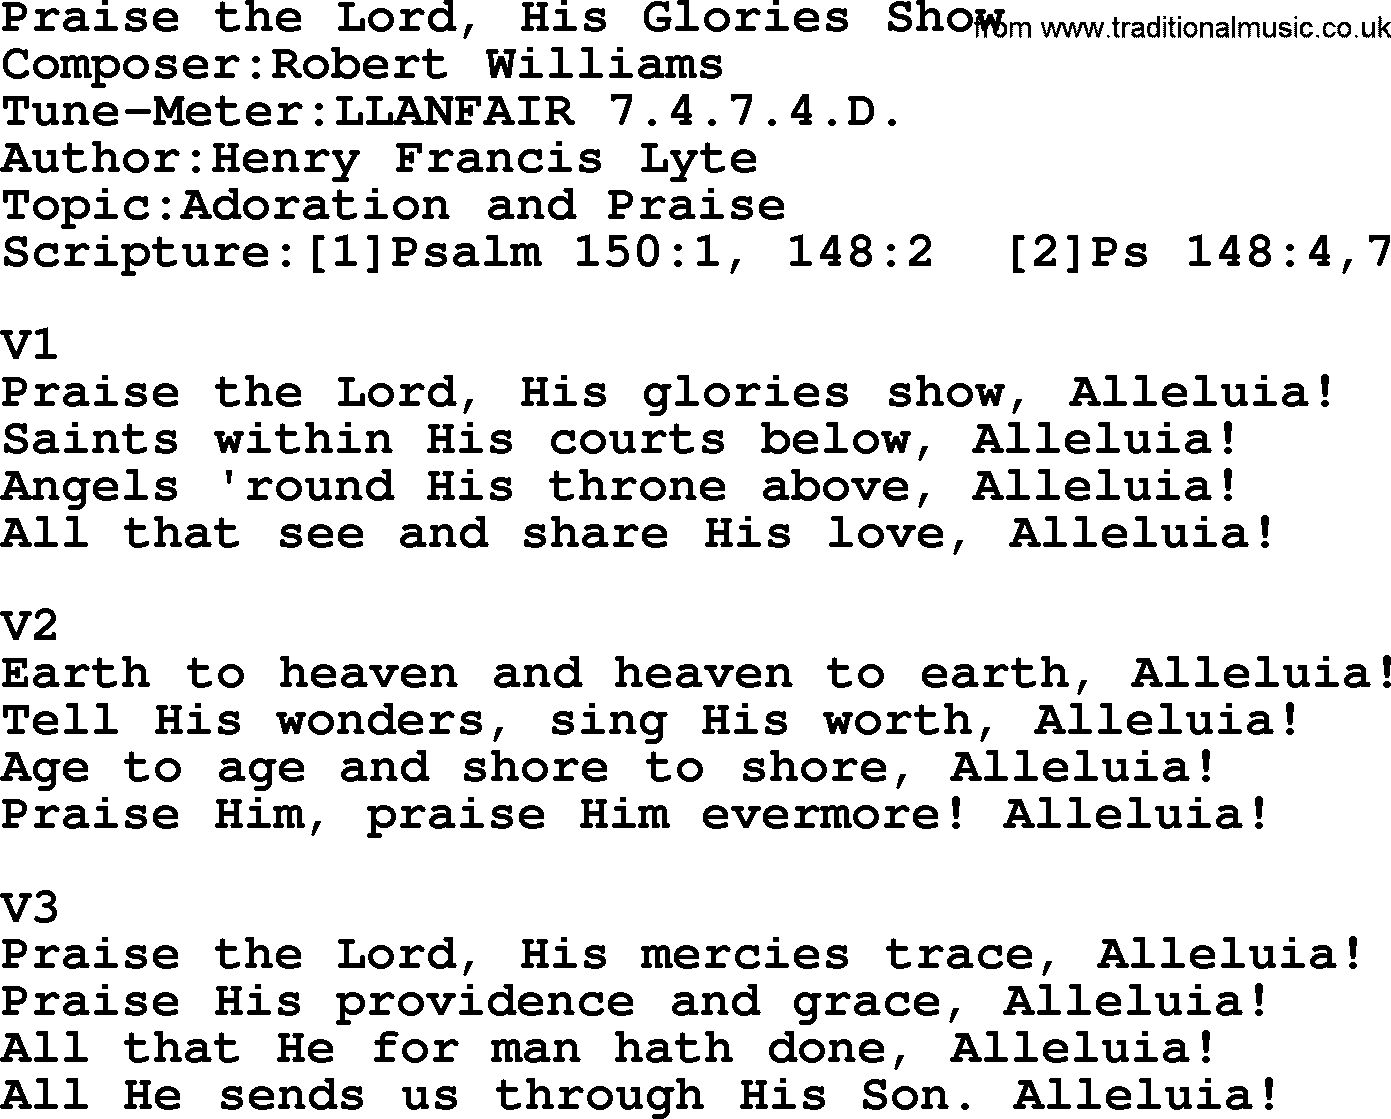 Adventist Hynms collection, Hymn: Praise The Lord, His Glories Show, lyrics with PDF